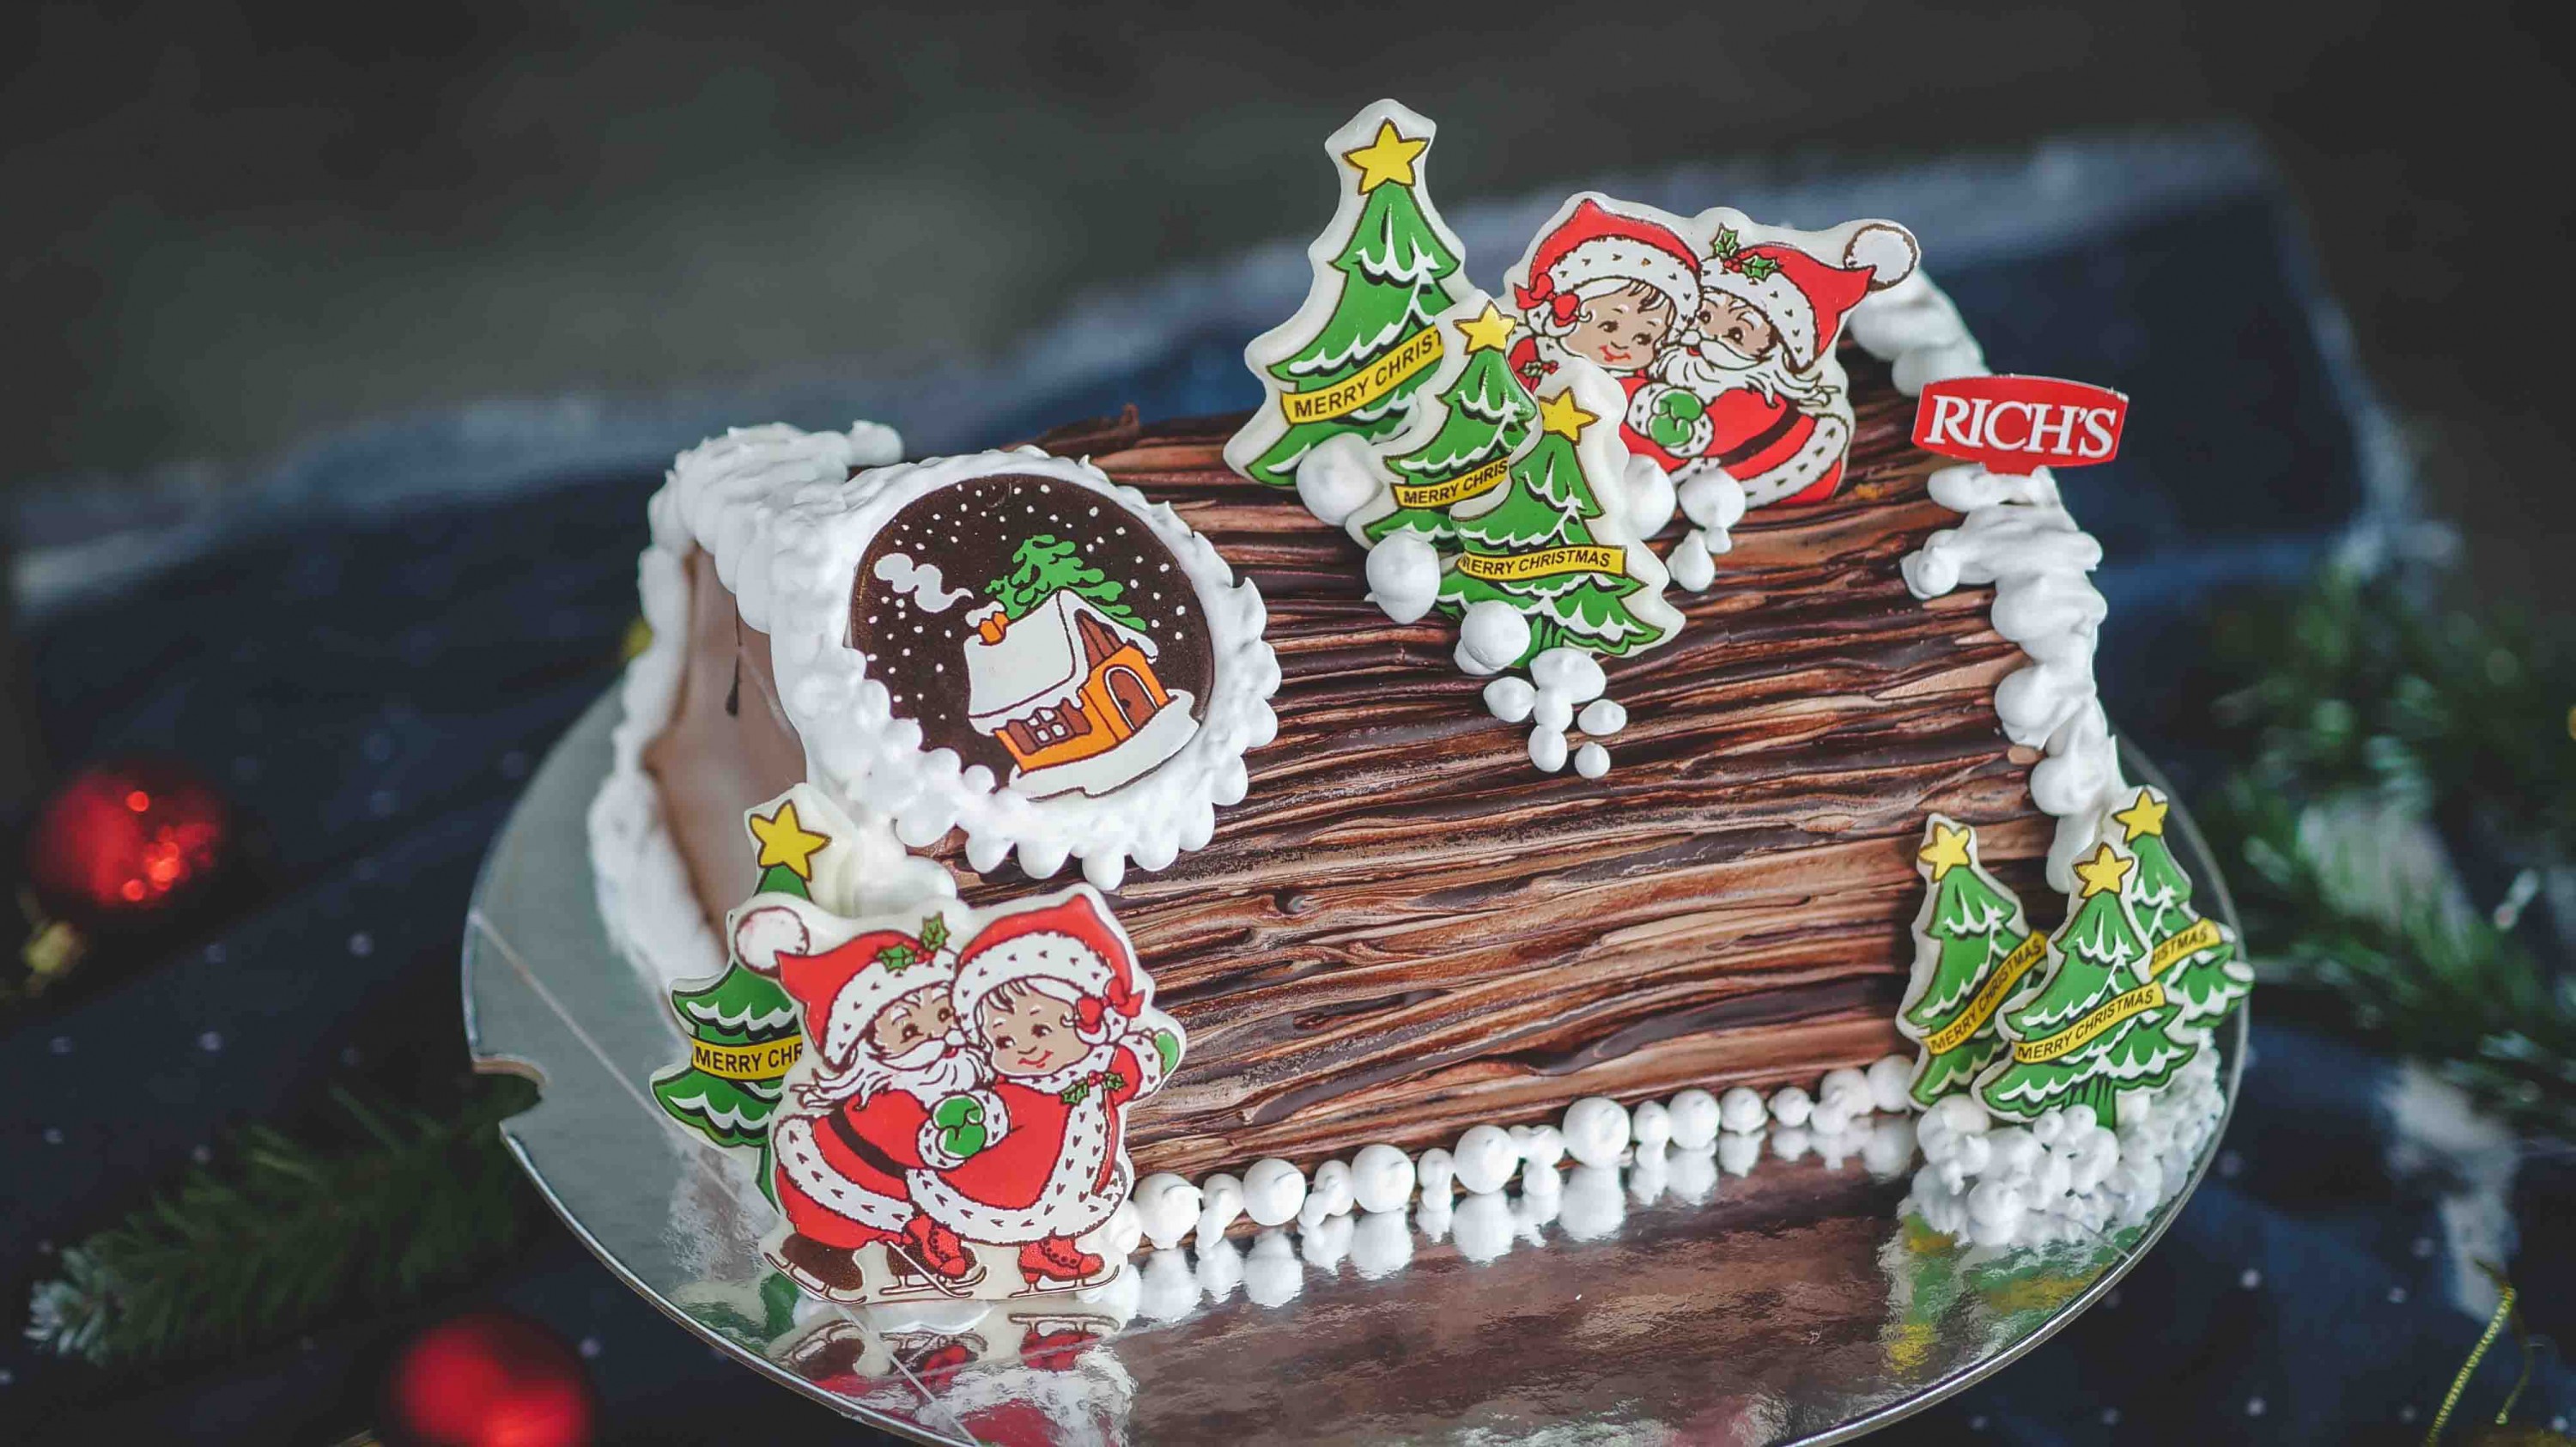 Yule Log - Then and Now